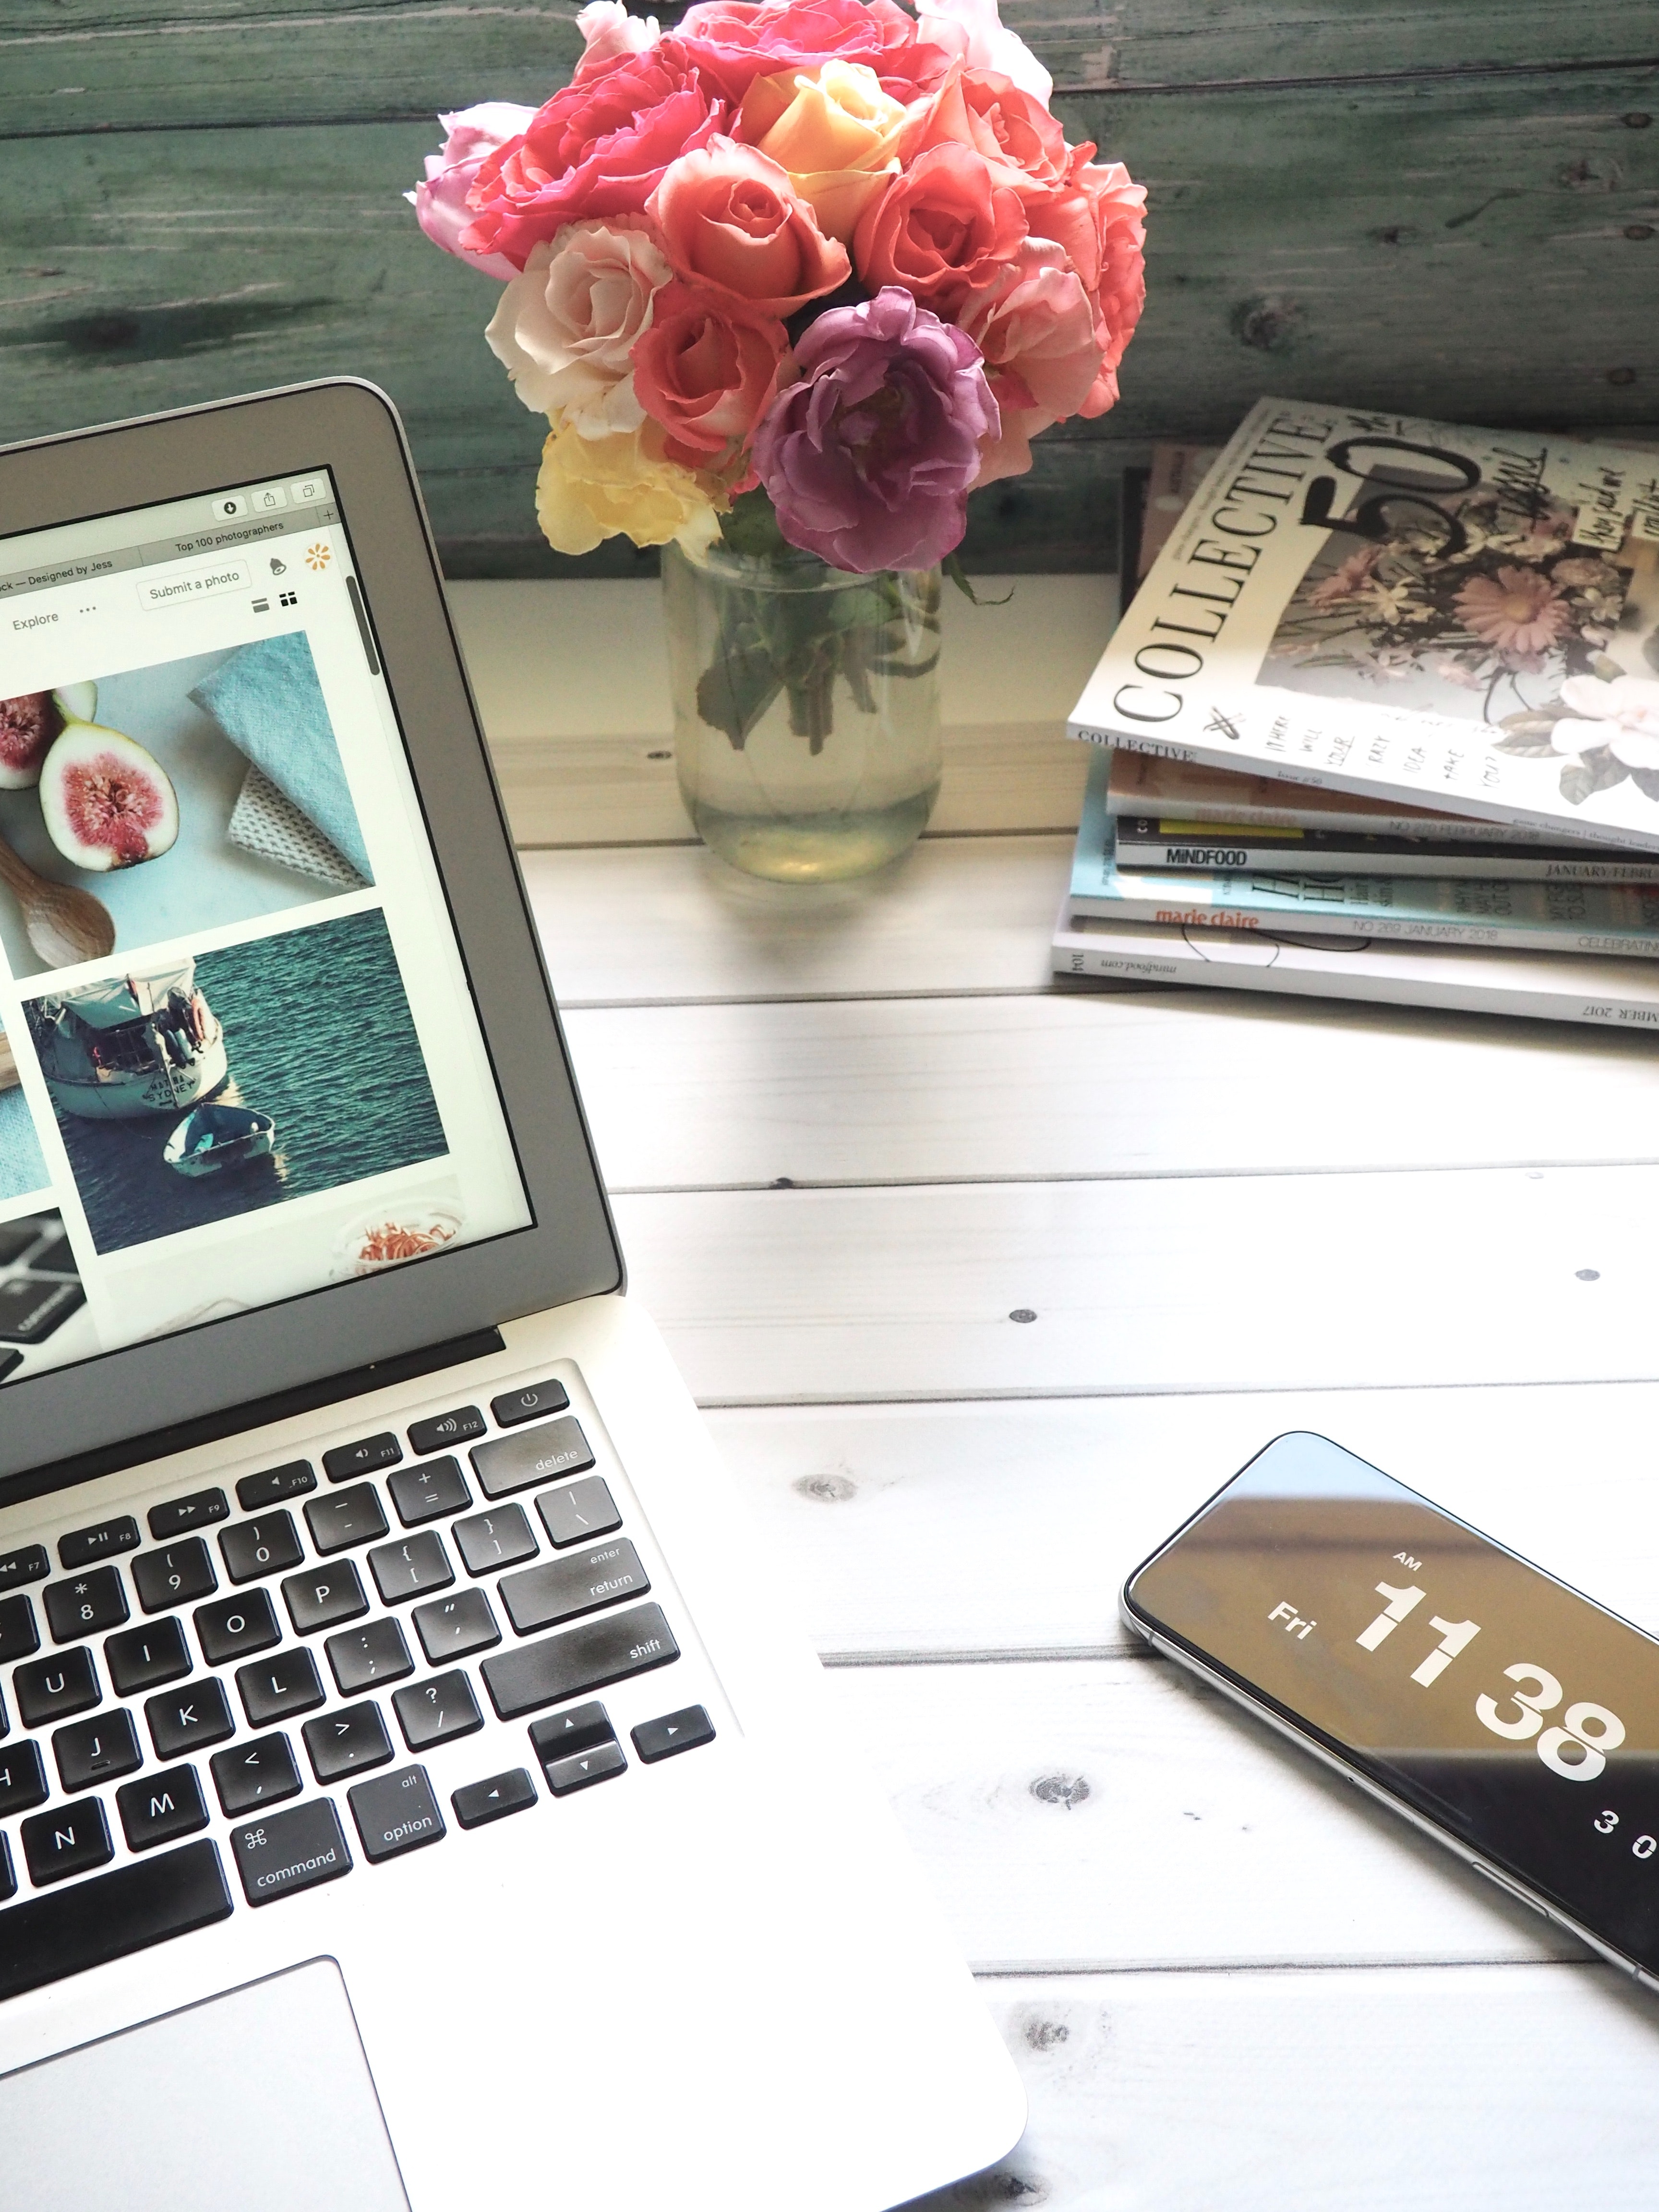 Macbook air, flower bouquet and magazines on white table photo